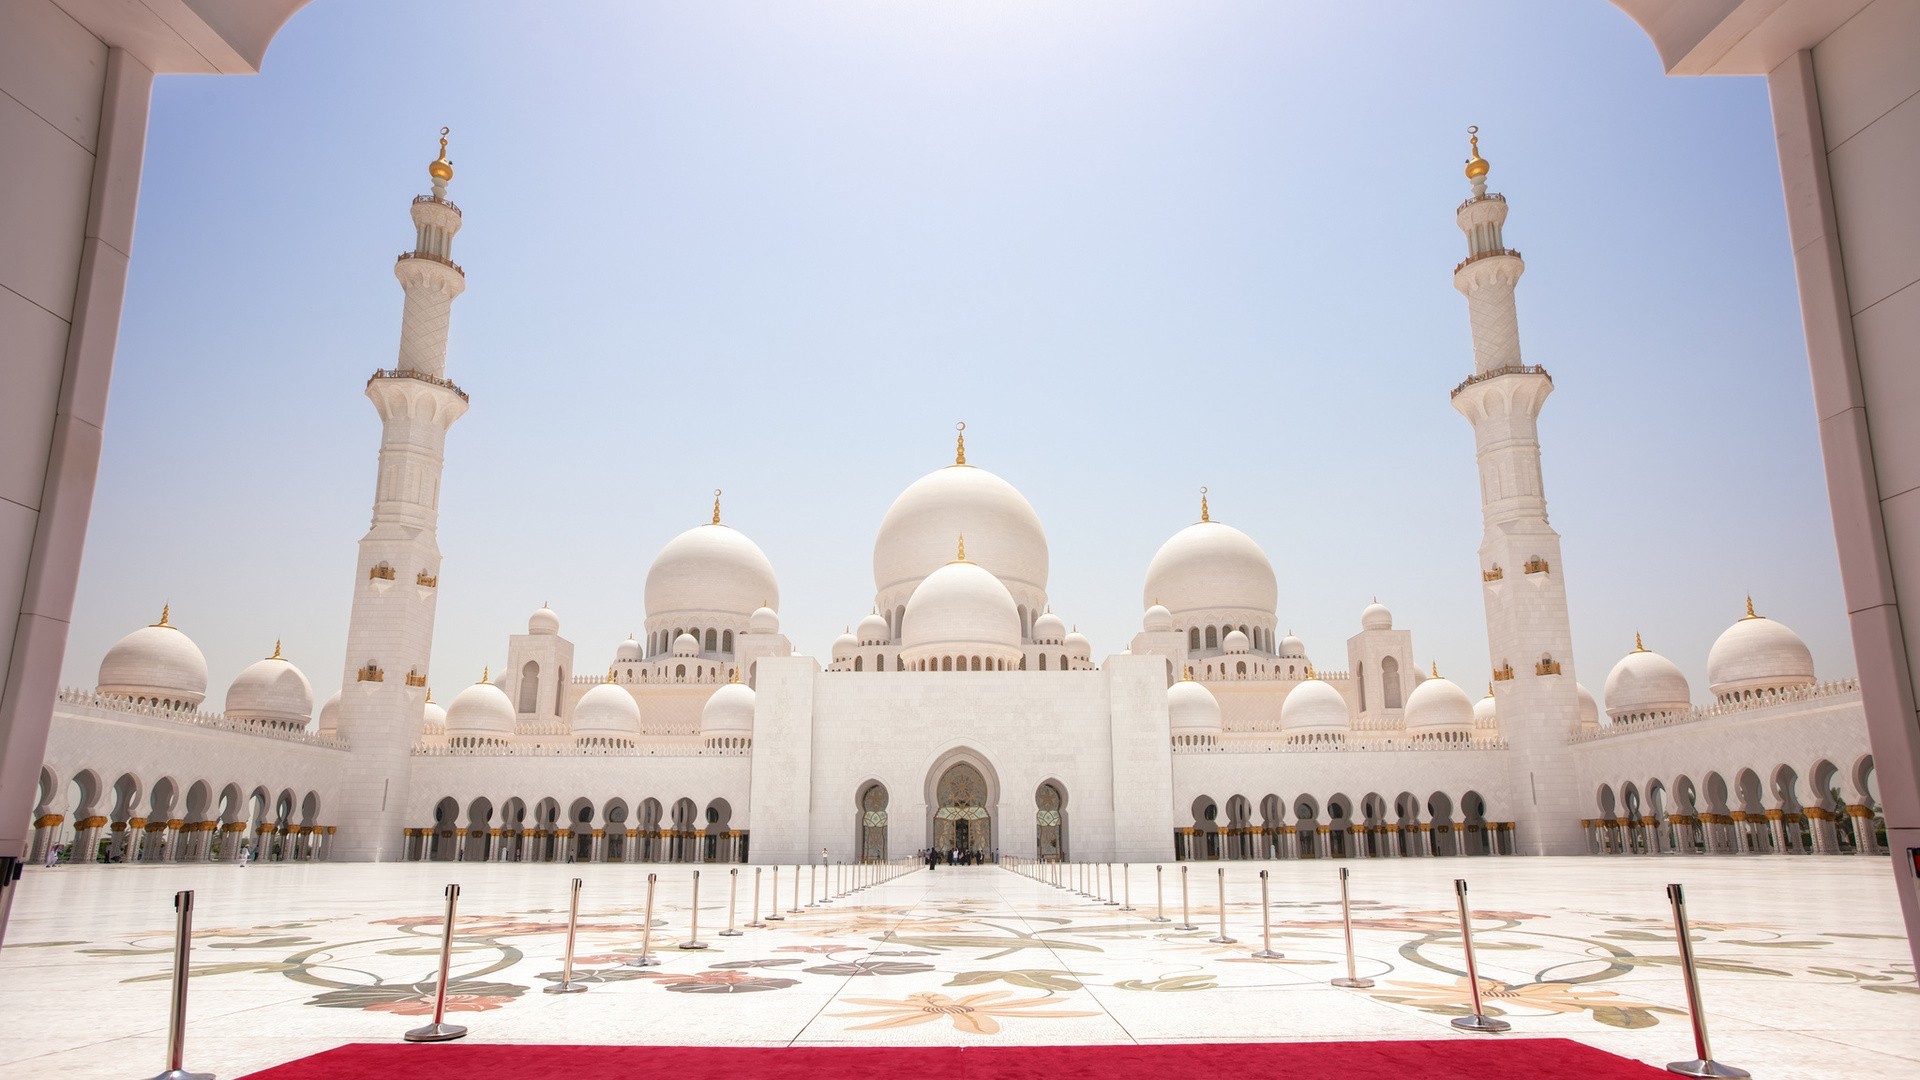 Abu Dhabi Architecture Tower Mosque 1920x1080